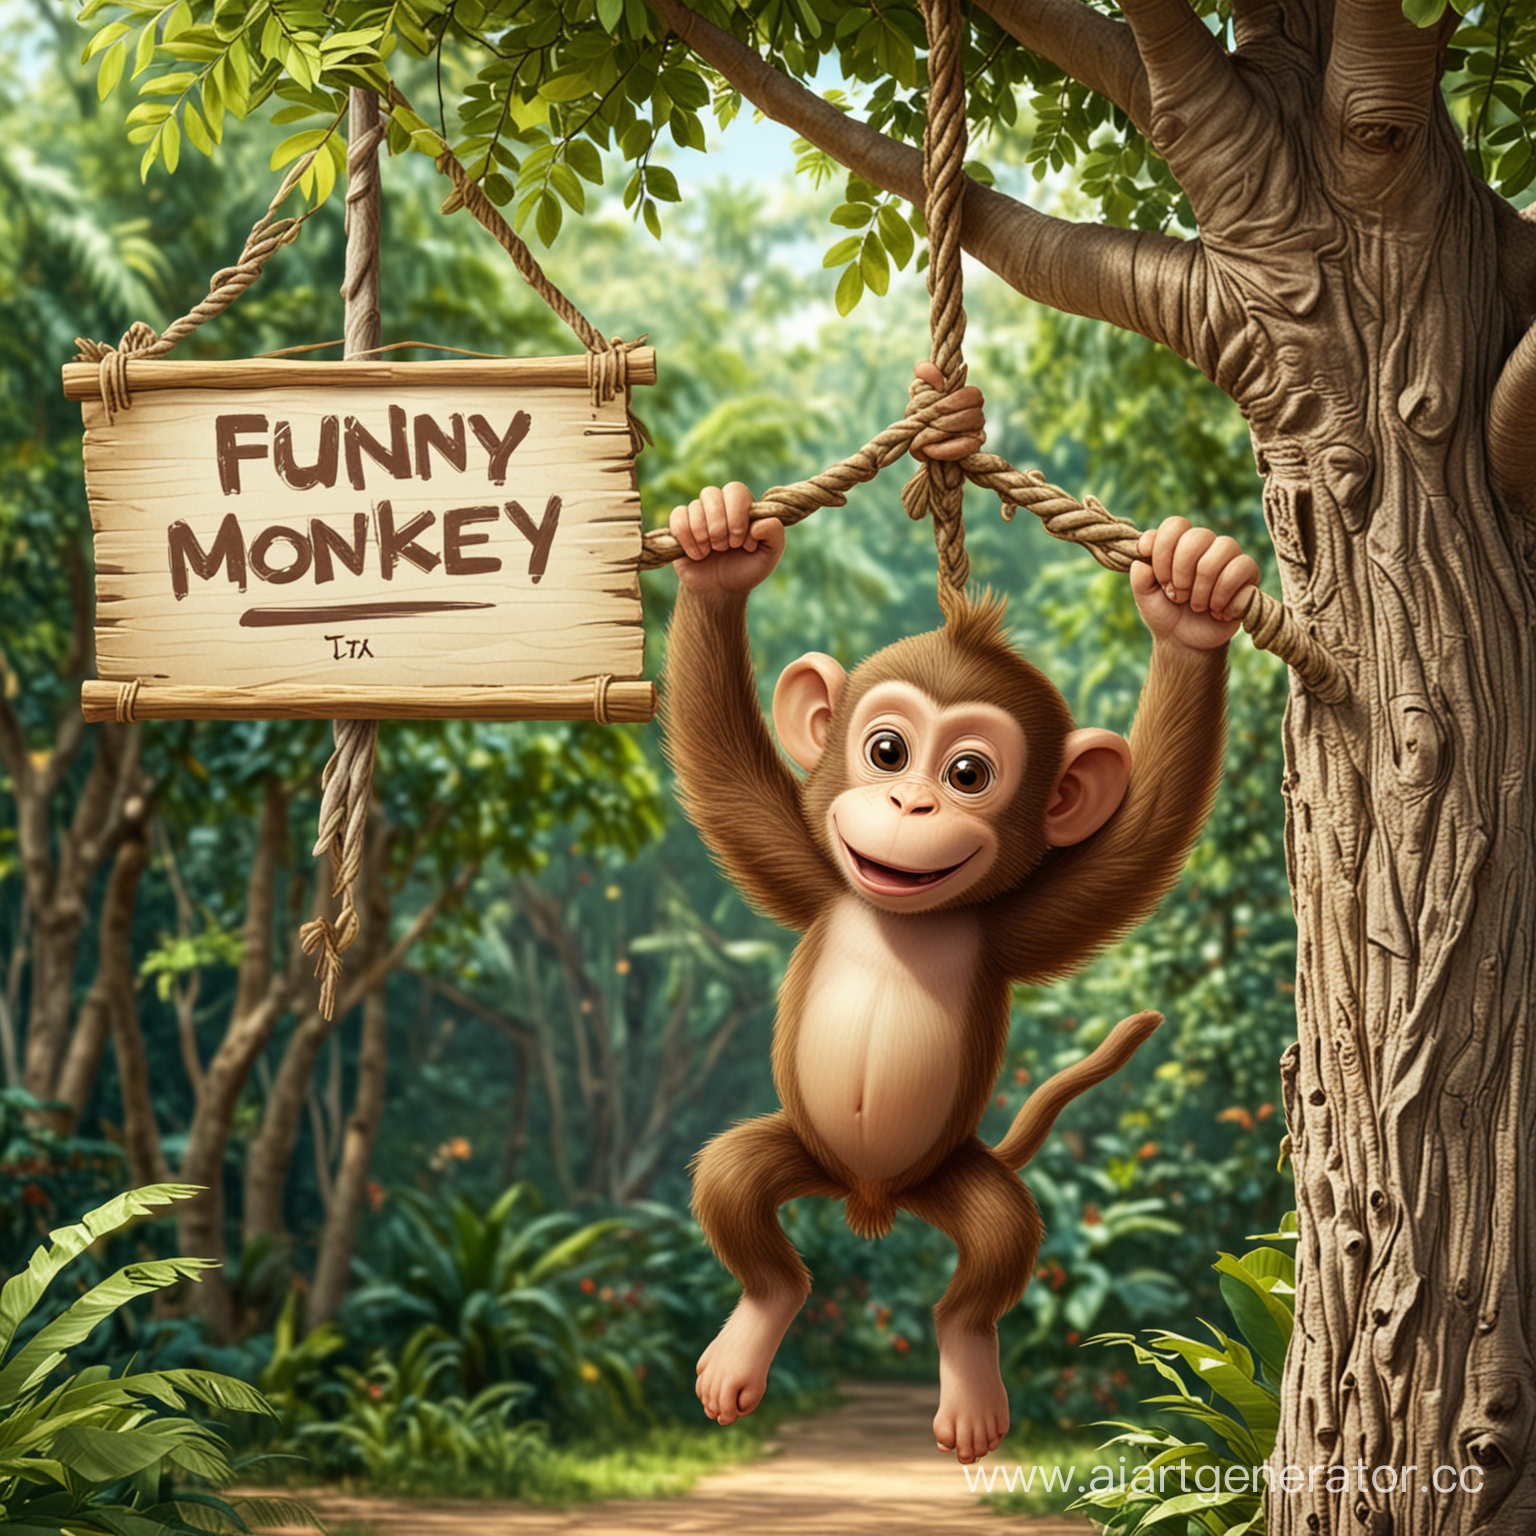 The monkey is hanging on a tree and next to it is a sign with the text funny monkey